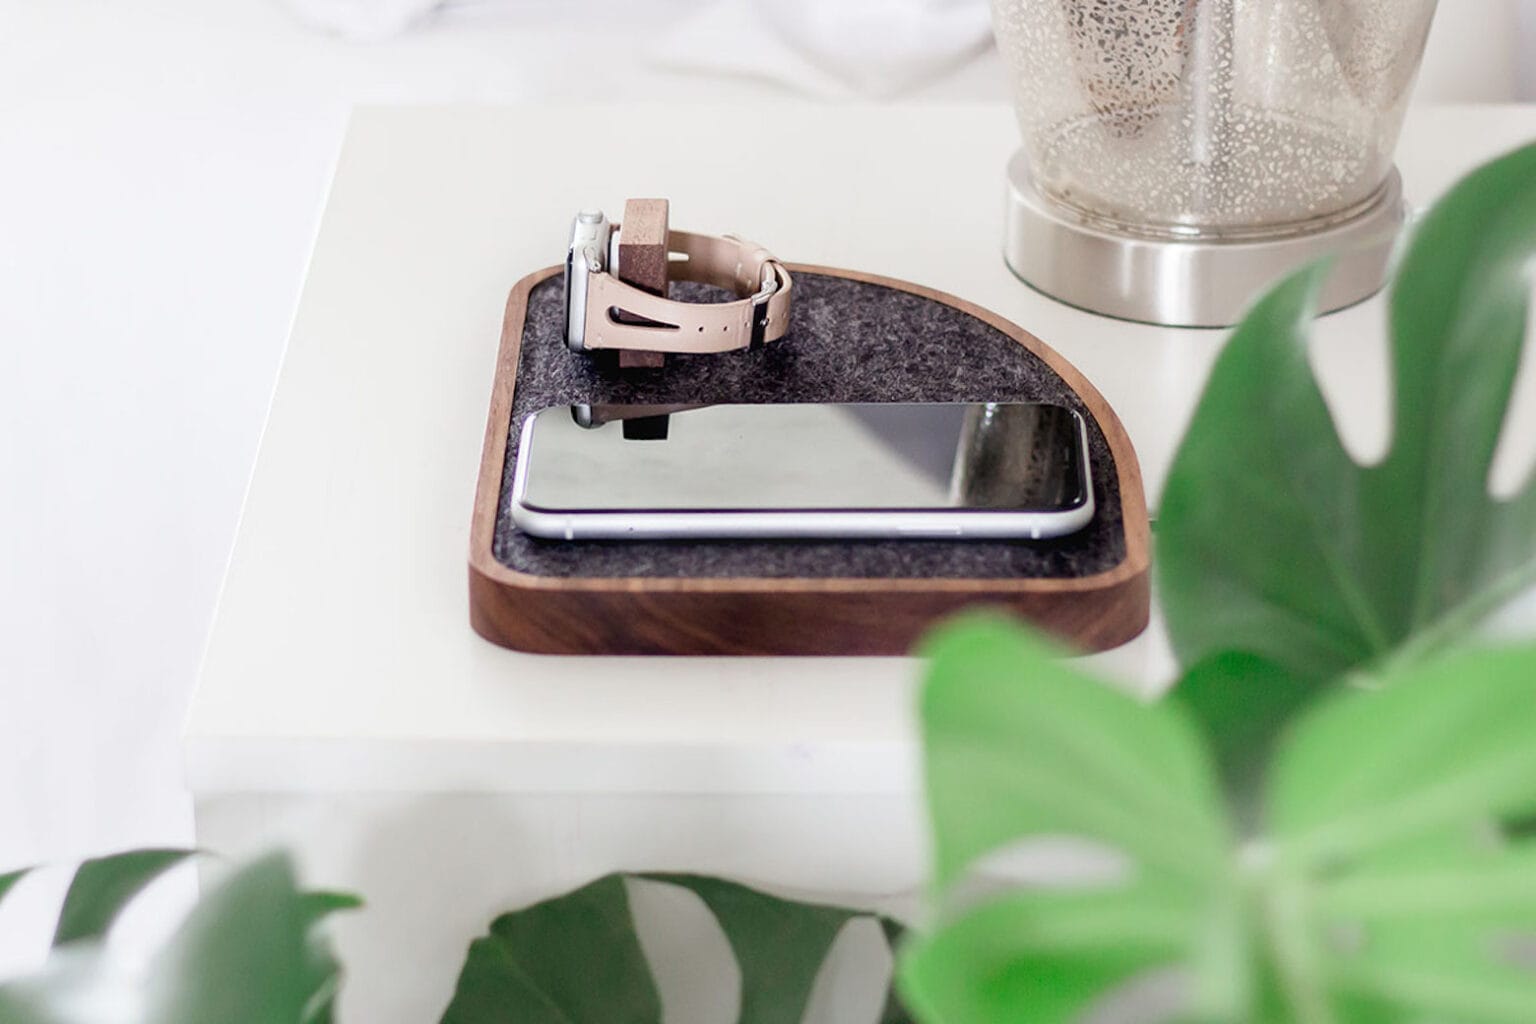 These wireless charging docks will keep all of your devices powered up